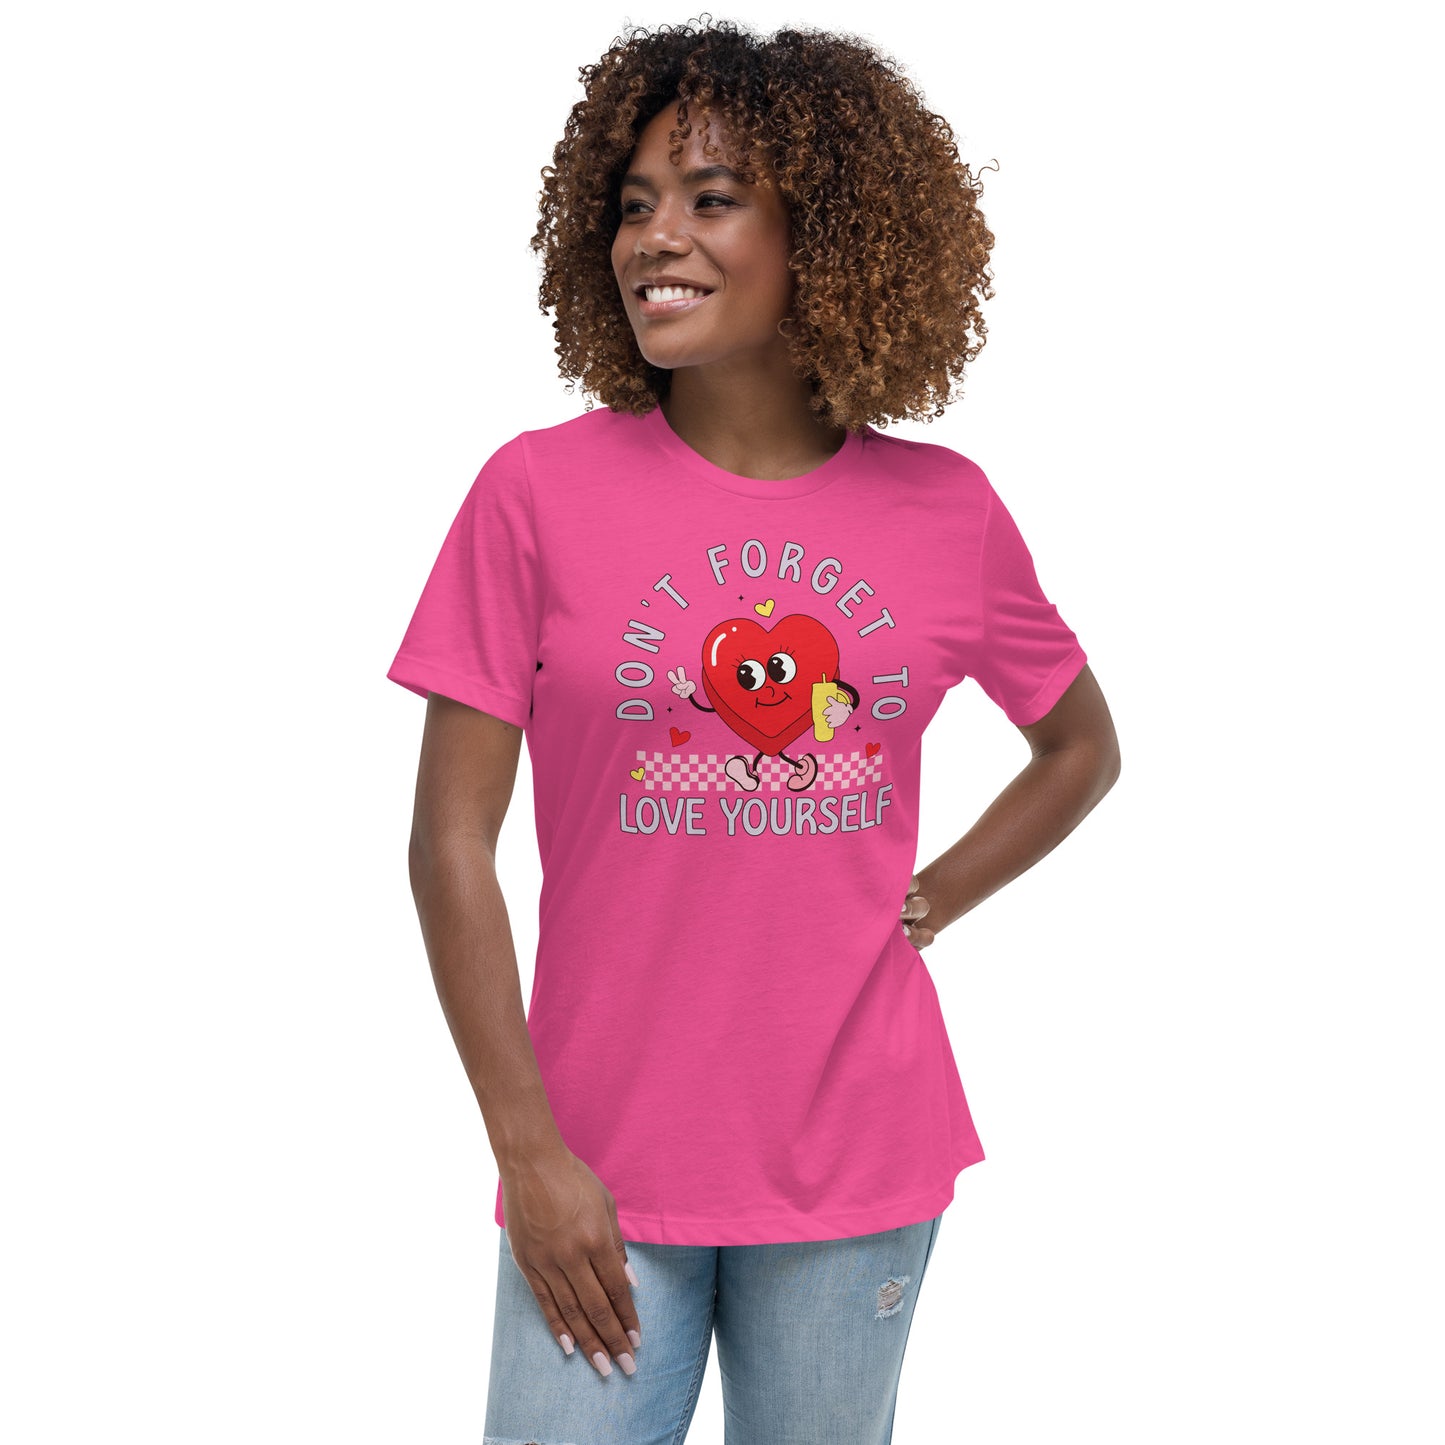 Love Yourself Women's Relaxed T-Shirt